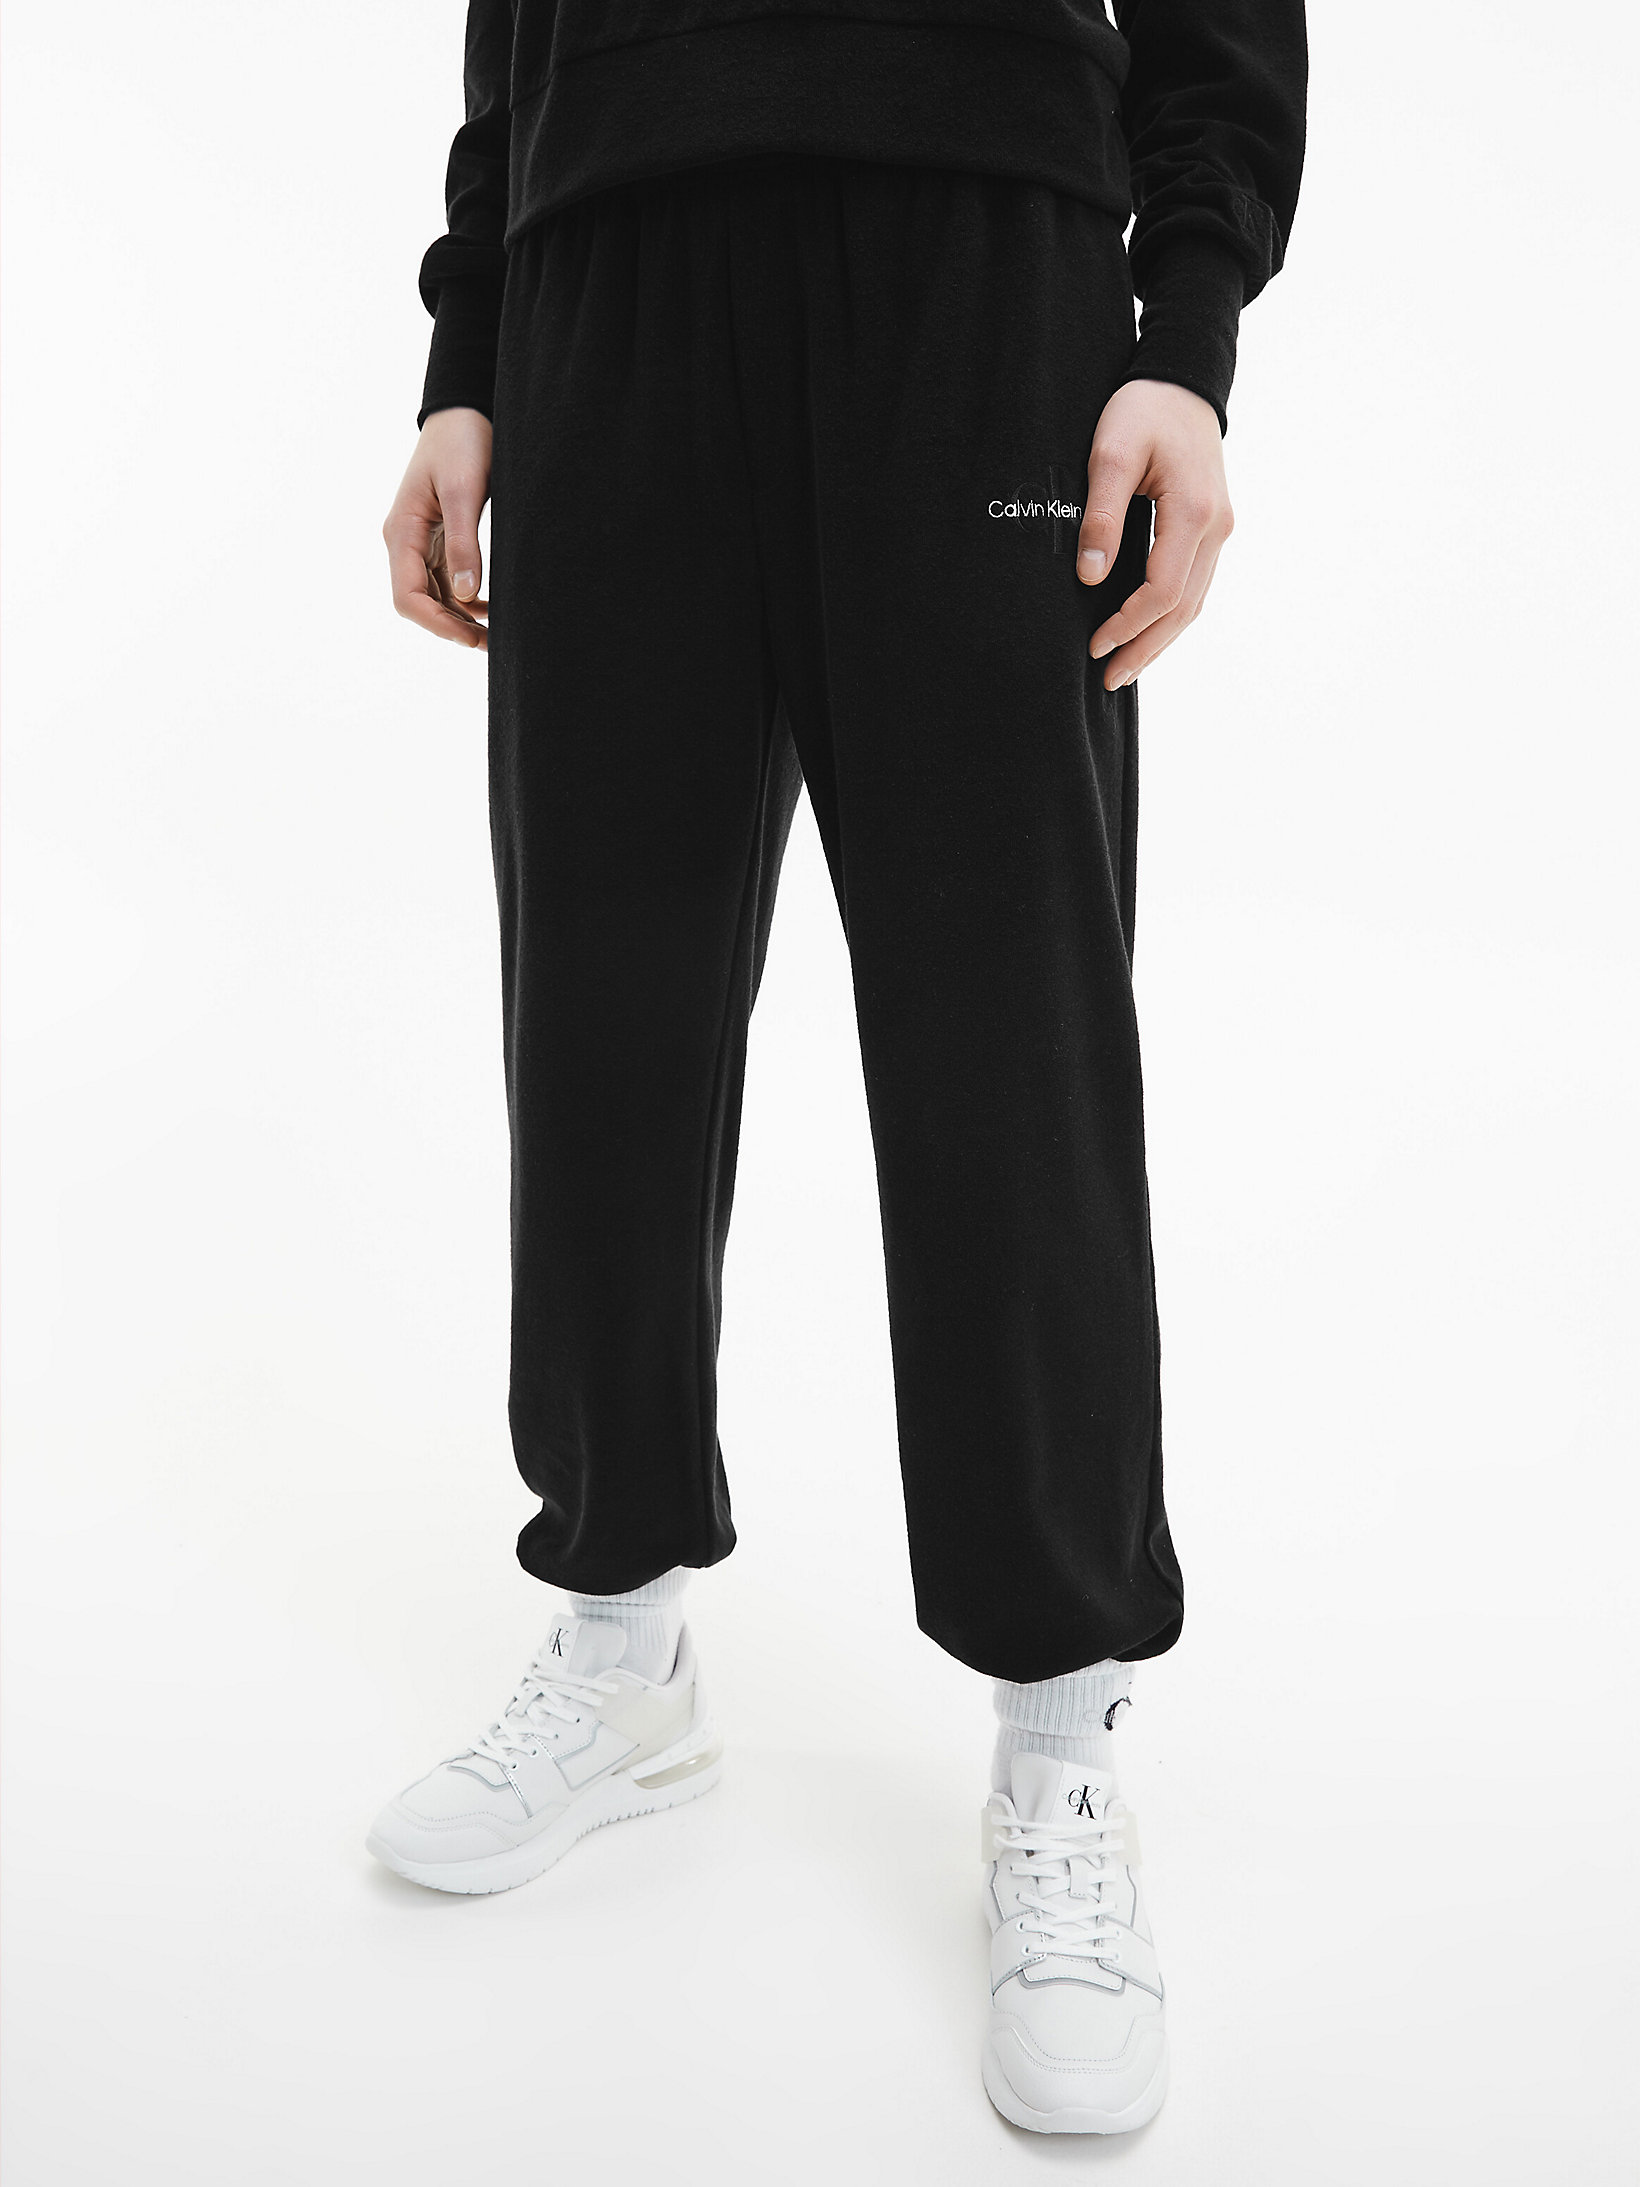 CK Black Relaxed Towelling Joggers undefined women Calvin Klein